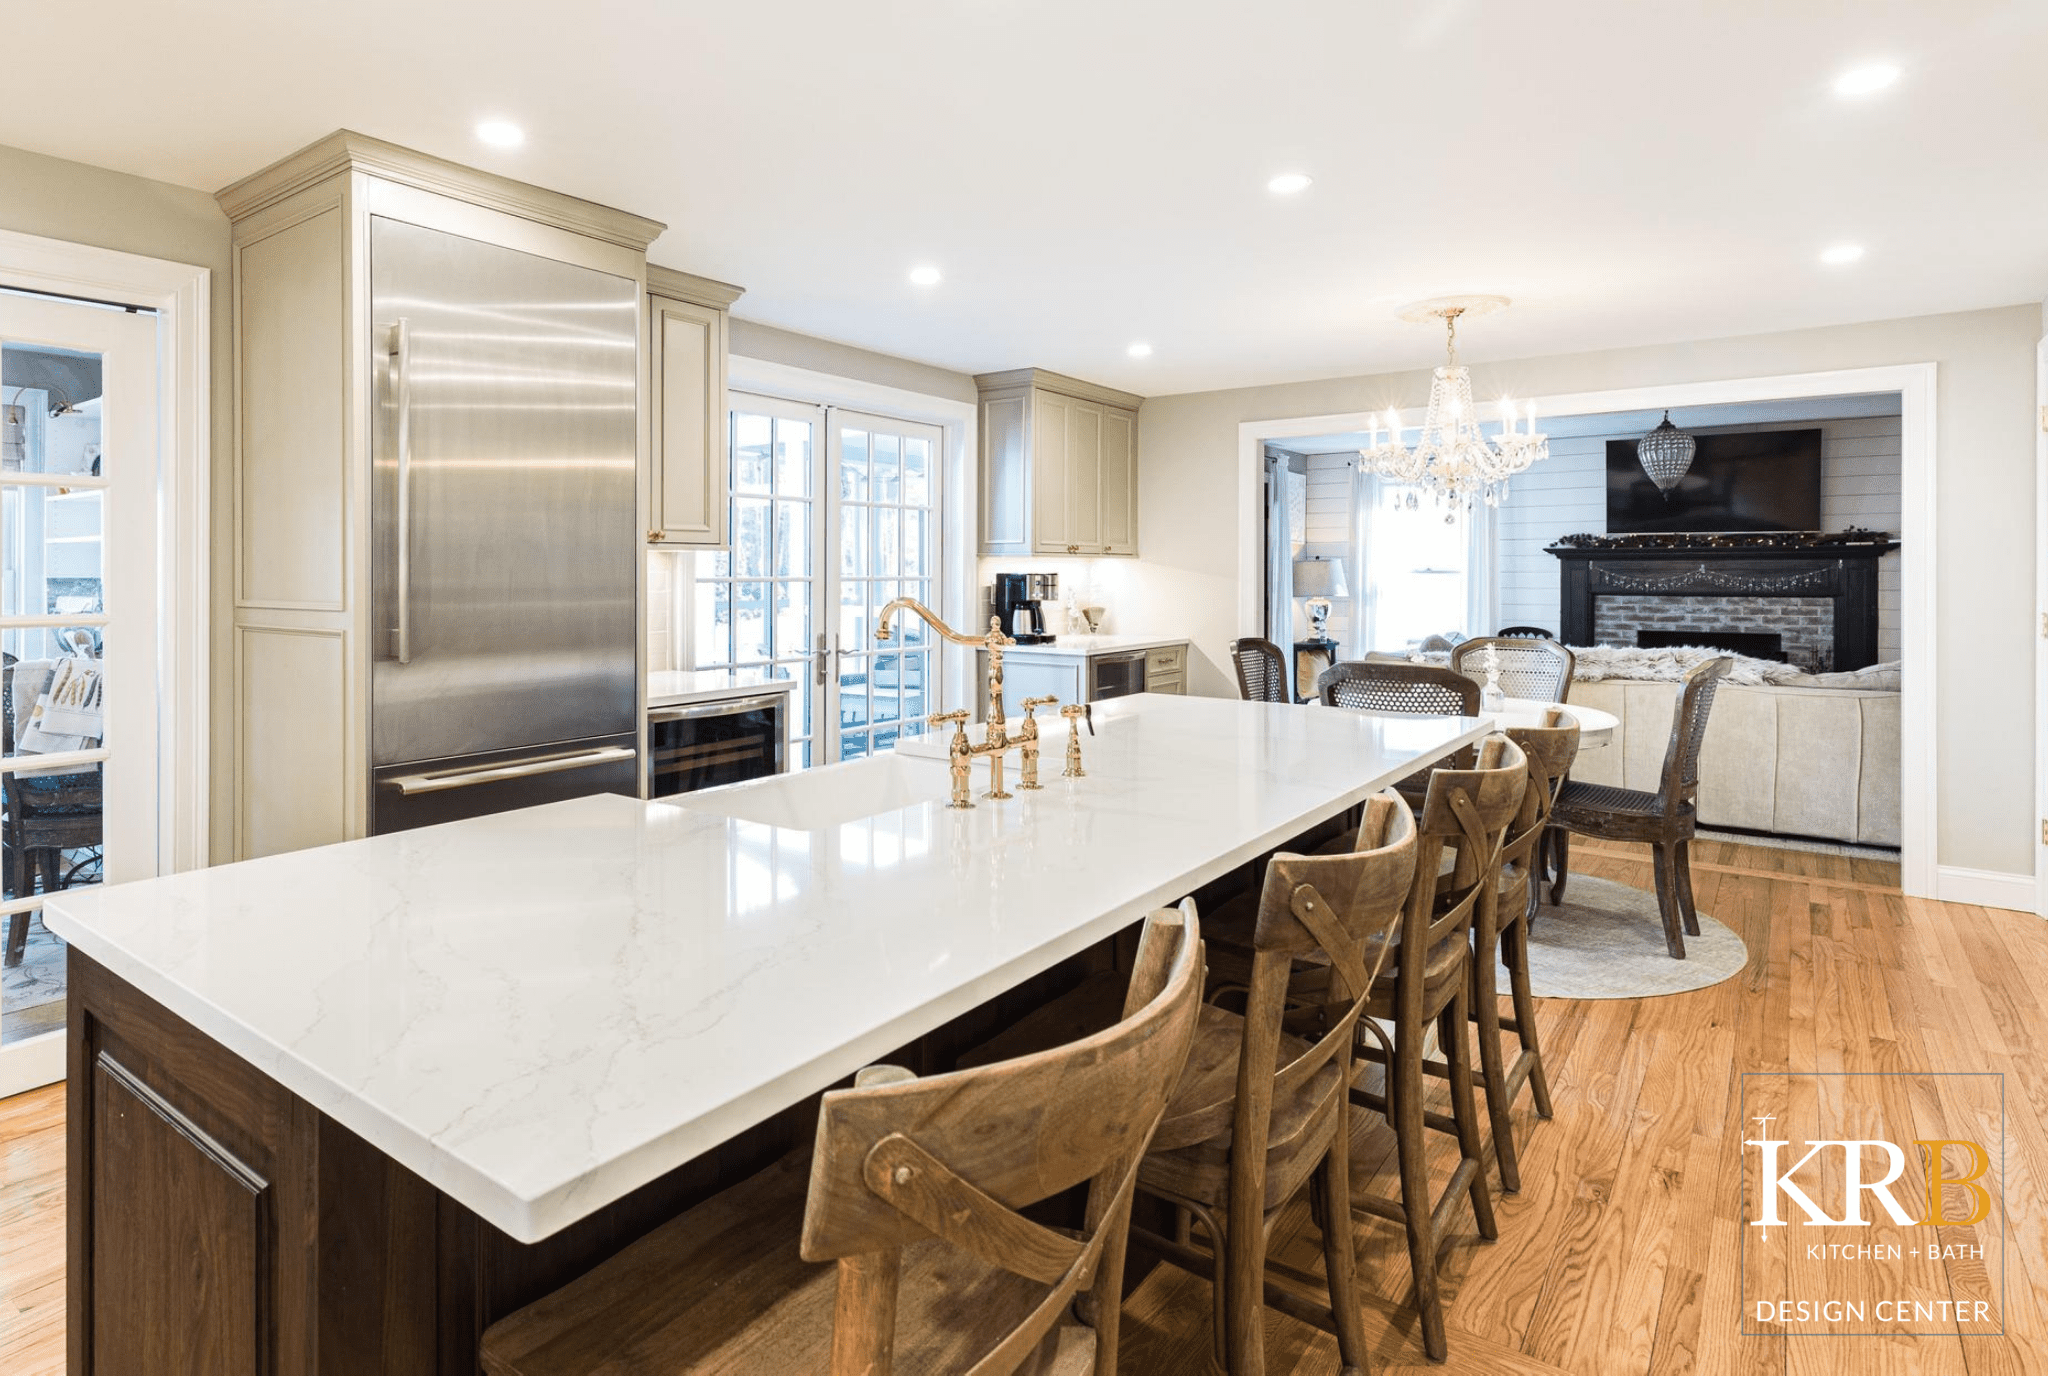 French inspired kitchen with large white marble island